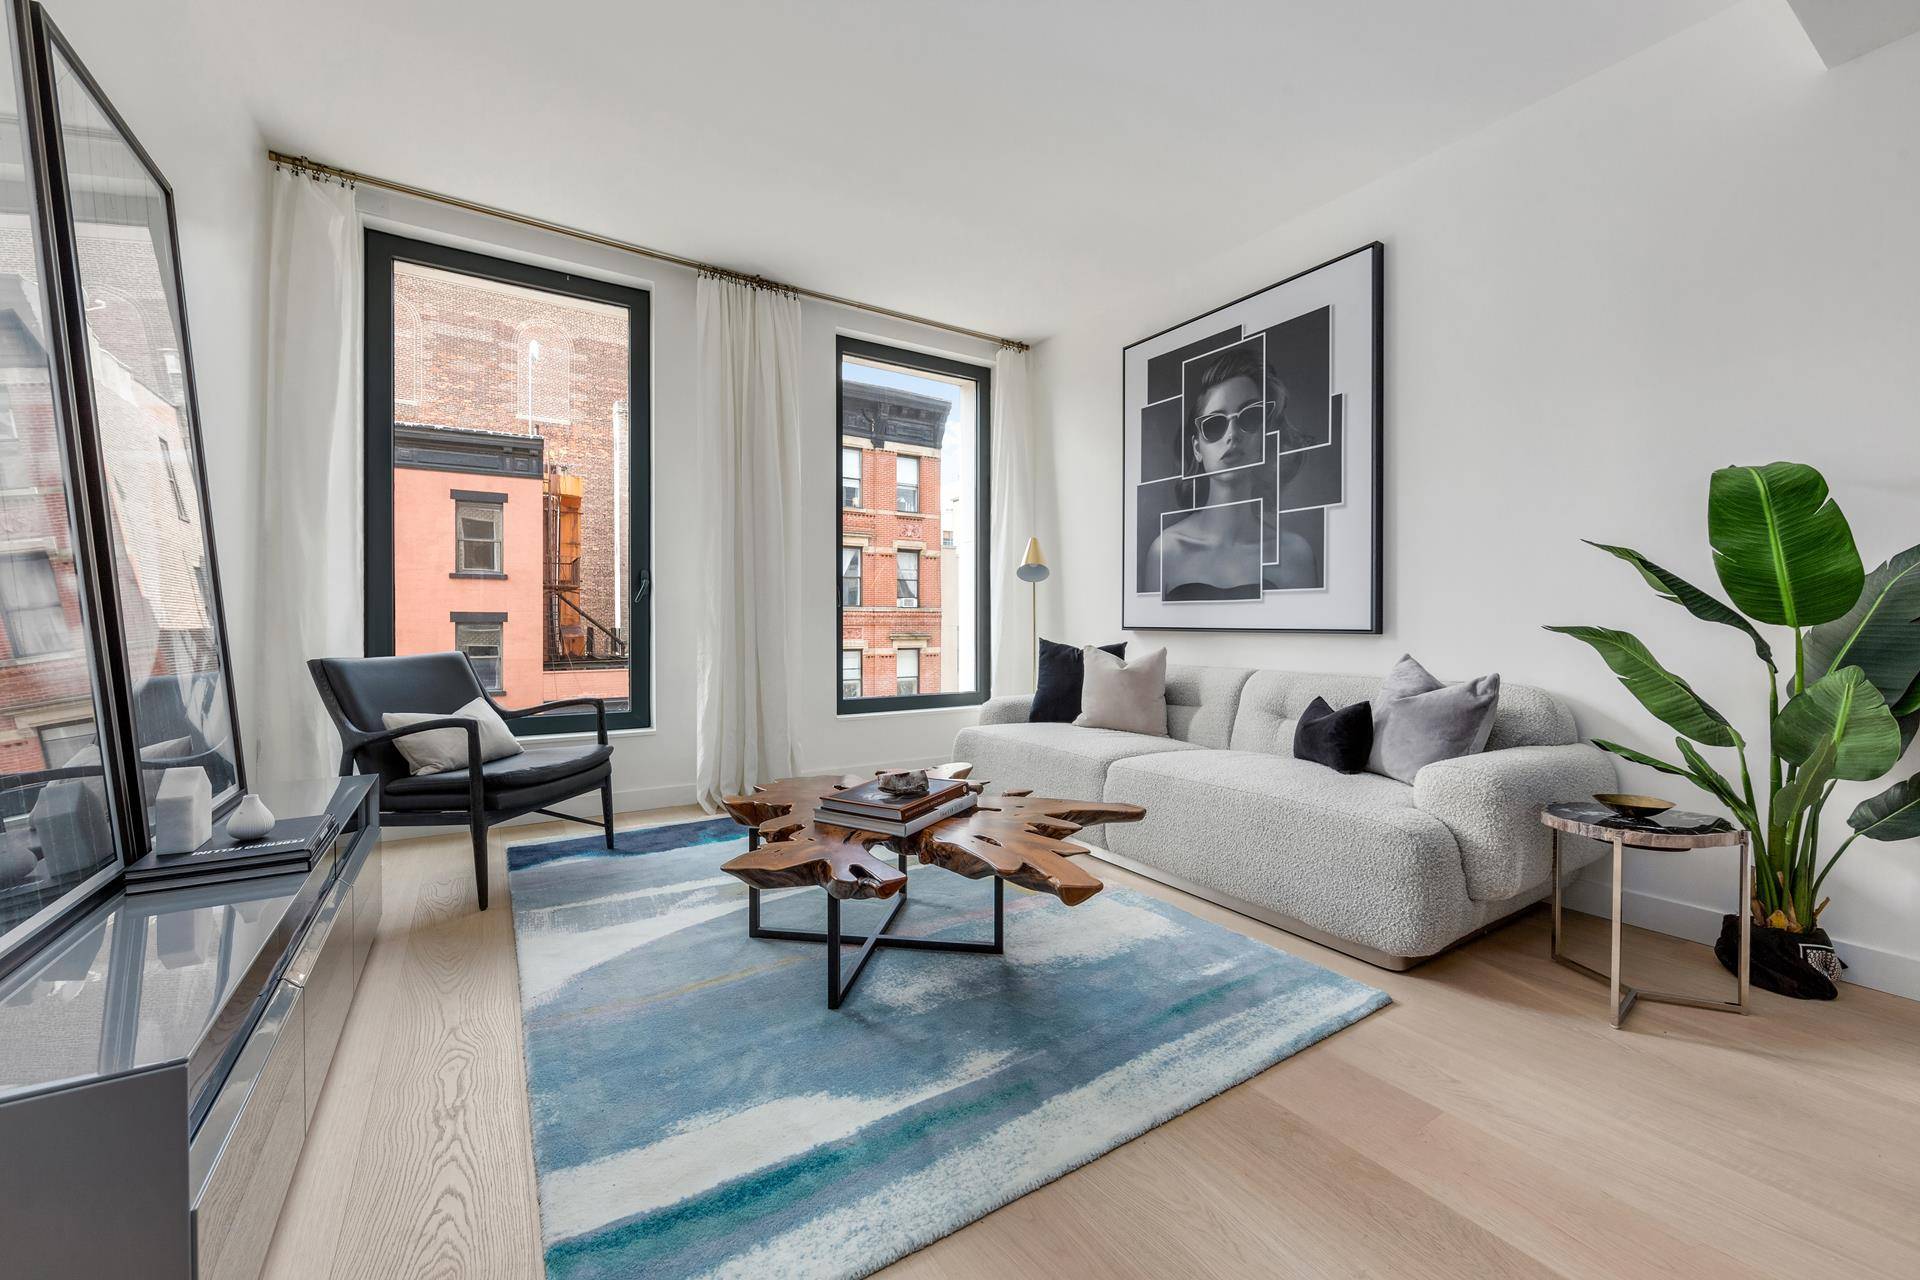 Introducing 45 East 7th Street, a truly extraordinary, landmarked new development building by one of NYC's leading architects and featuring an exclusive collection of 21 luxurious residences located at the ...